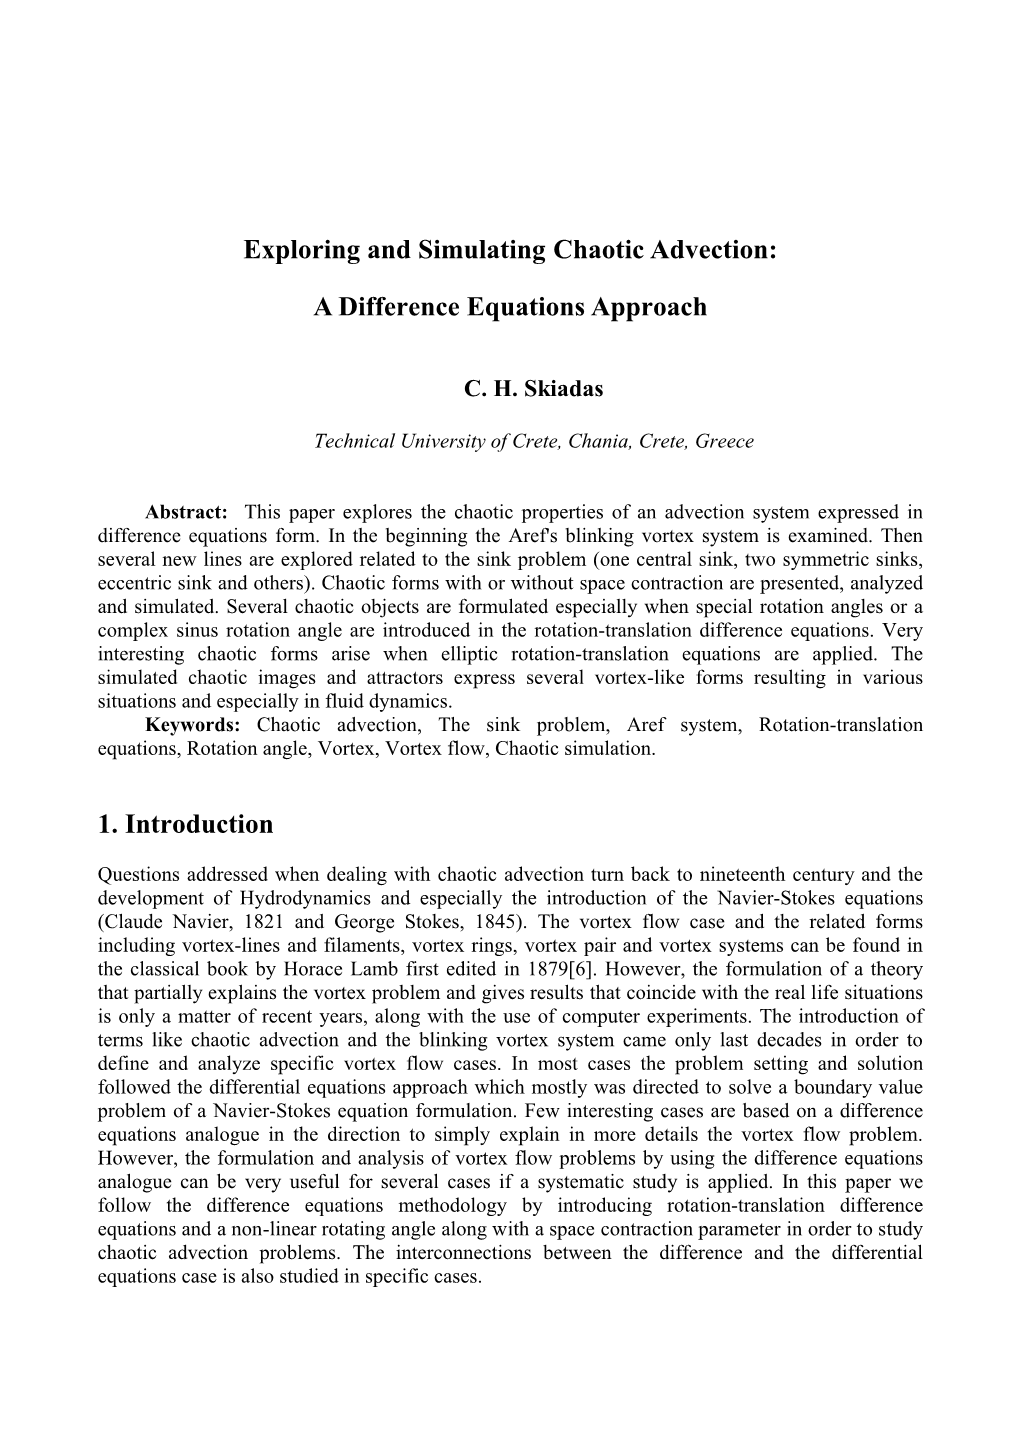 Exploring and Simulating Chaotic Advection: a Difference Equations Approach 1. Introduction